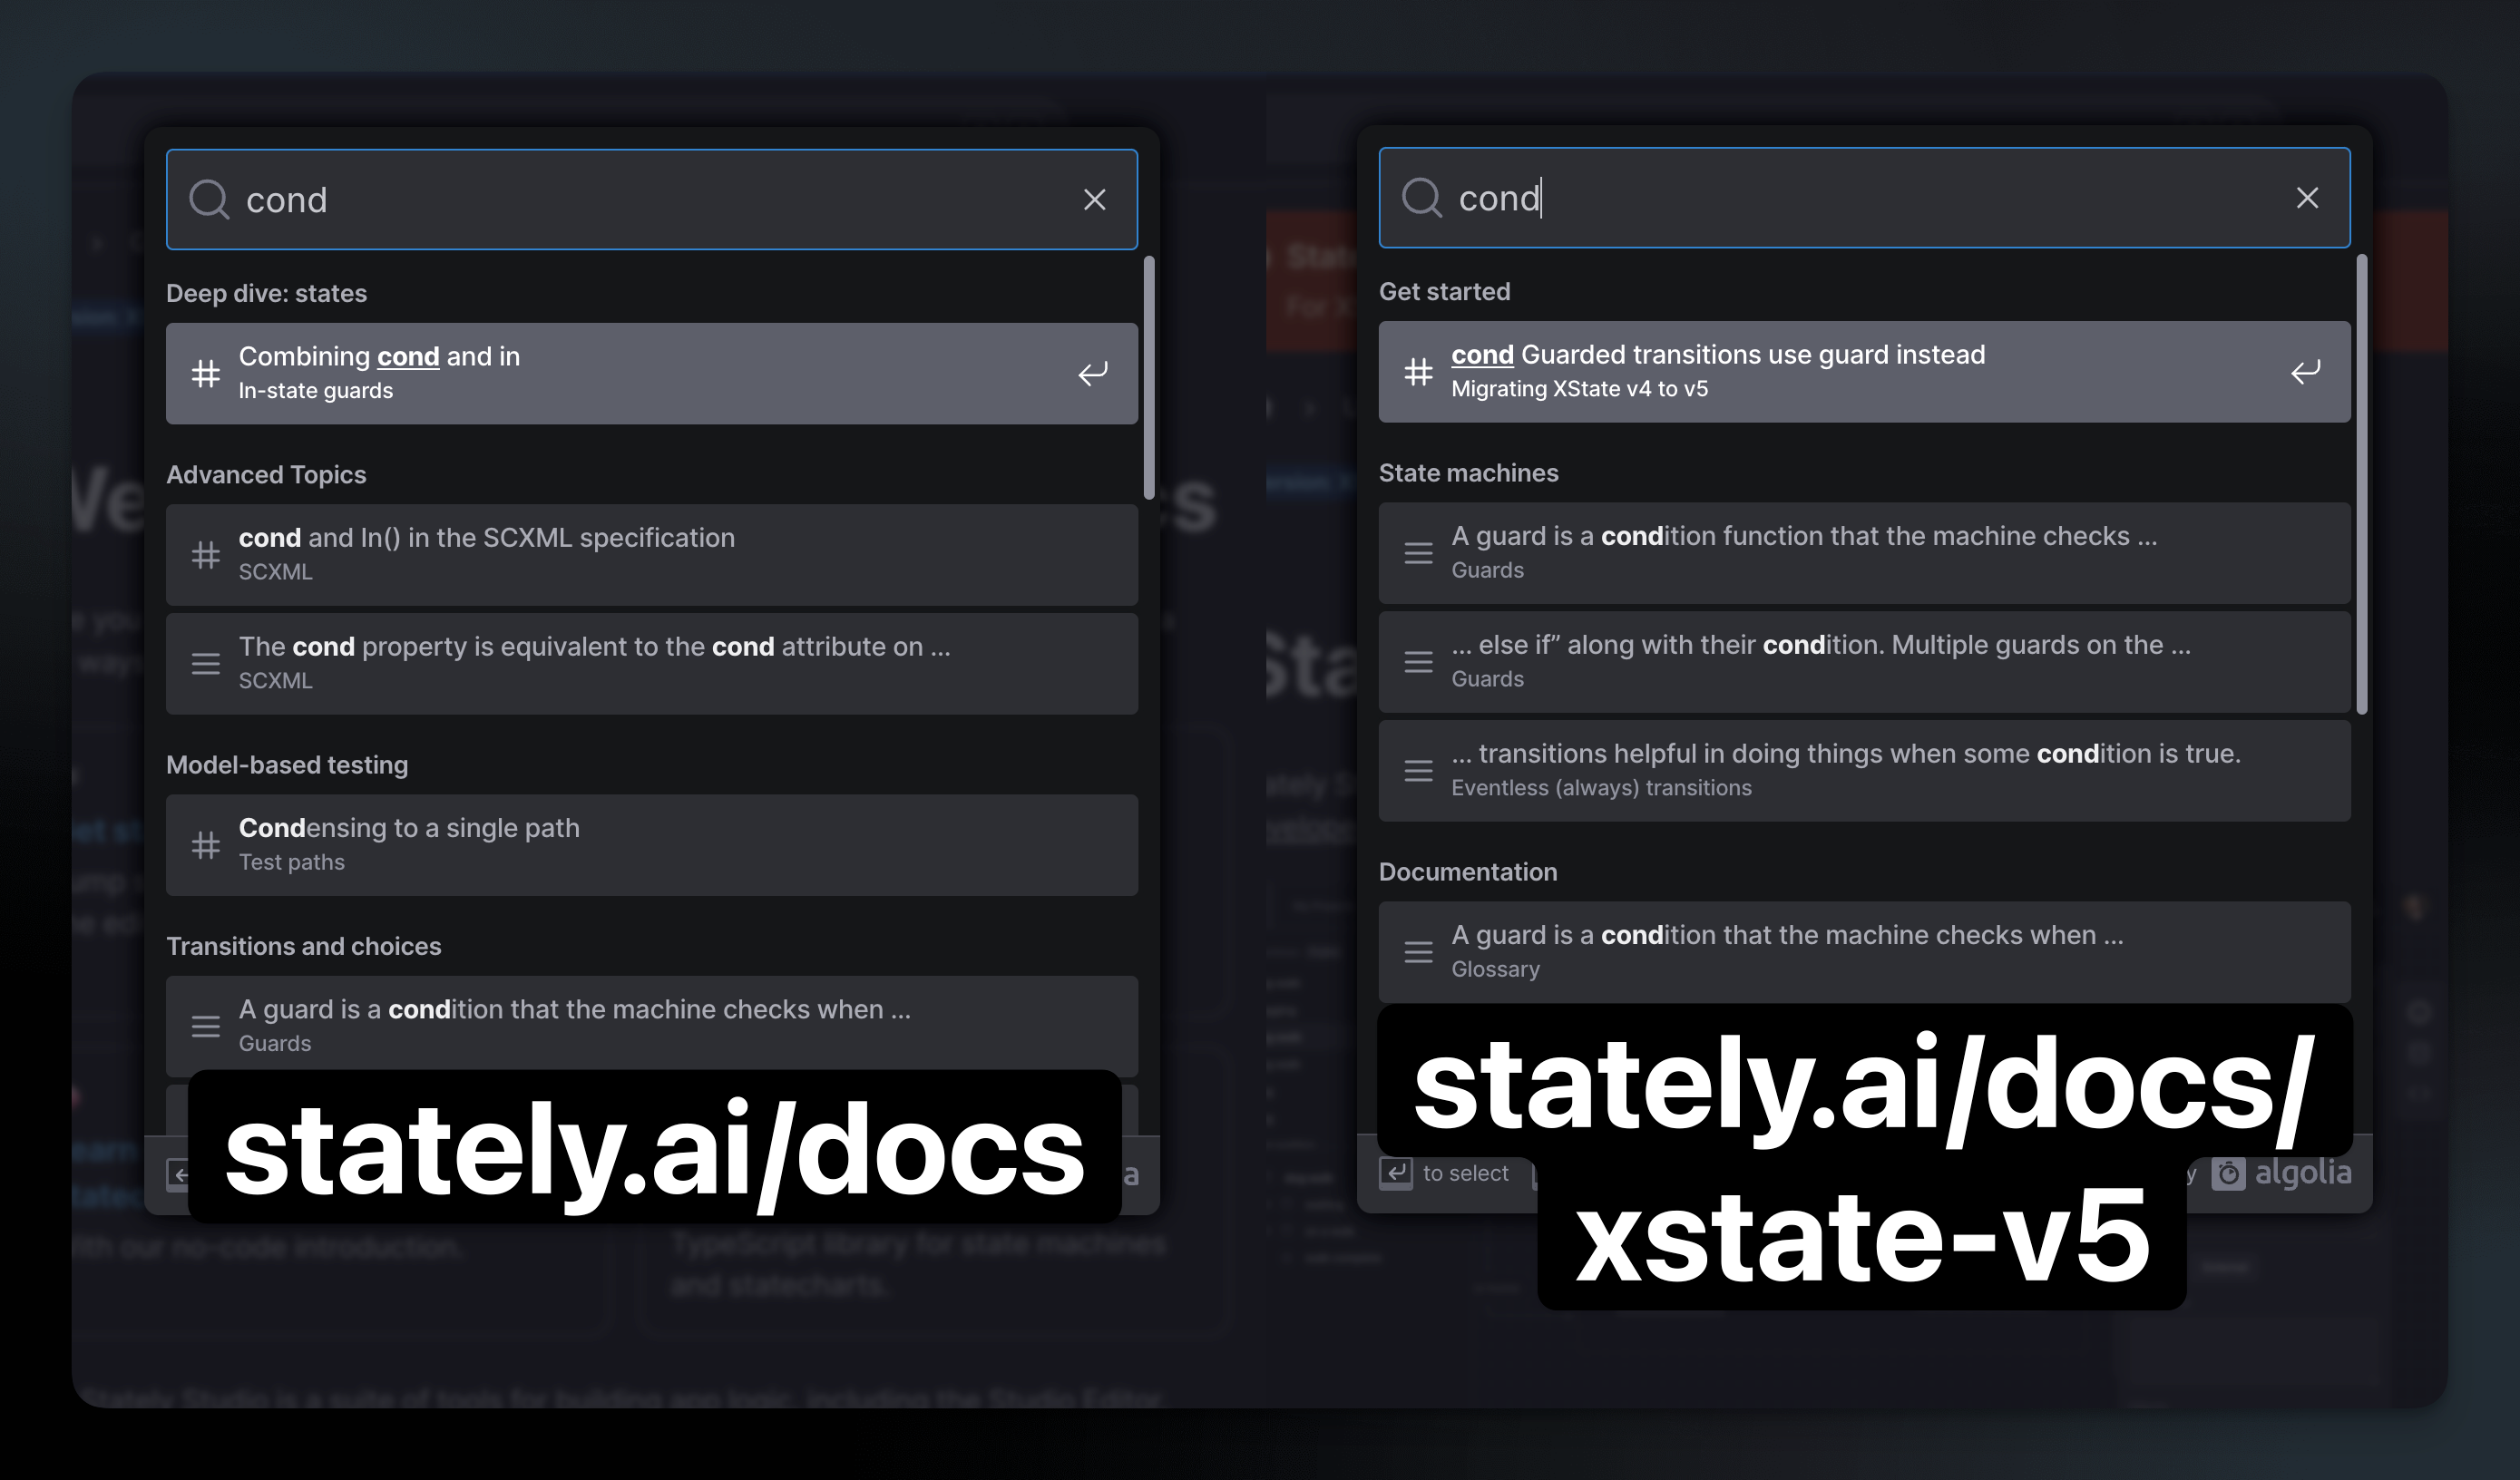 Side-by-side comparison of search results for cond in the Stately docs. In the V4 docs, it gives you results about combining cond and in. In the V5 docs, it gives you results telling you to use guard instead of cond.